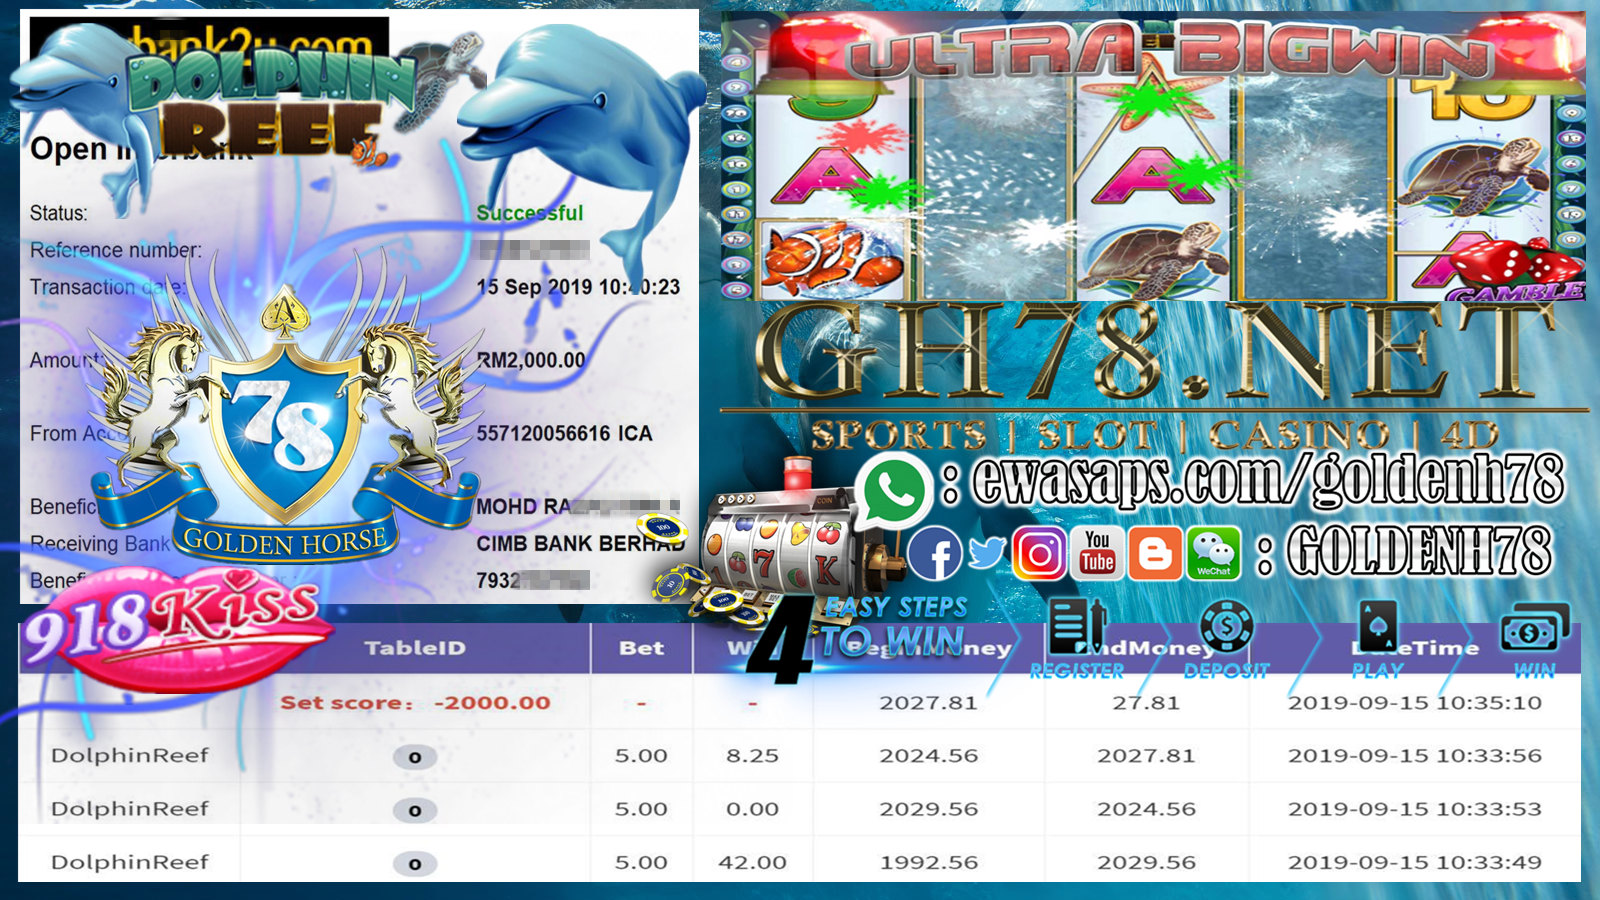 MEMBER MAIN GAME DOLPHINREEF MINTA CUCI RM2000 !!!